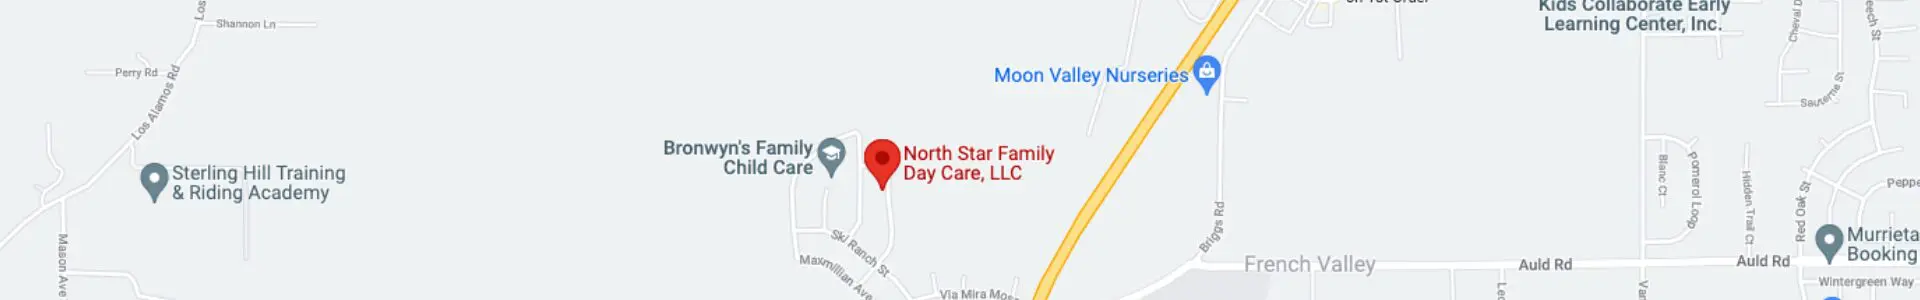 North Star Family Daycare